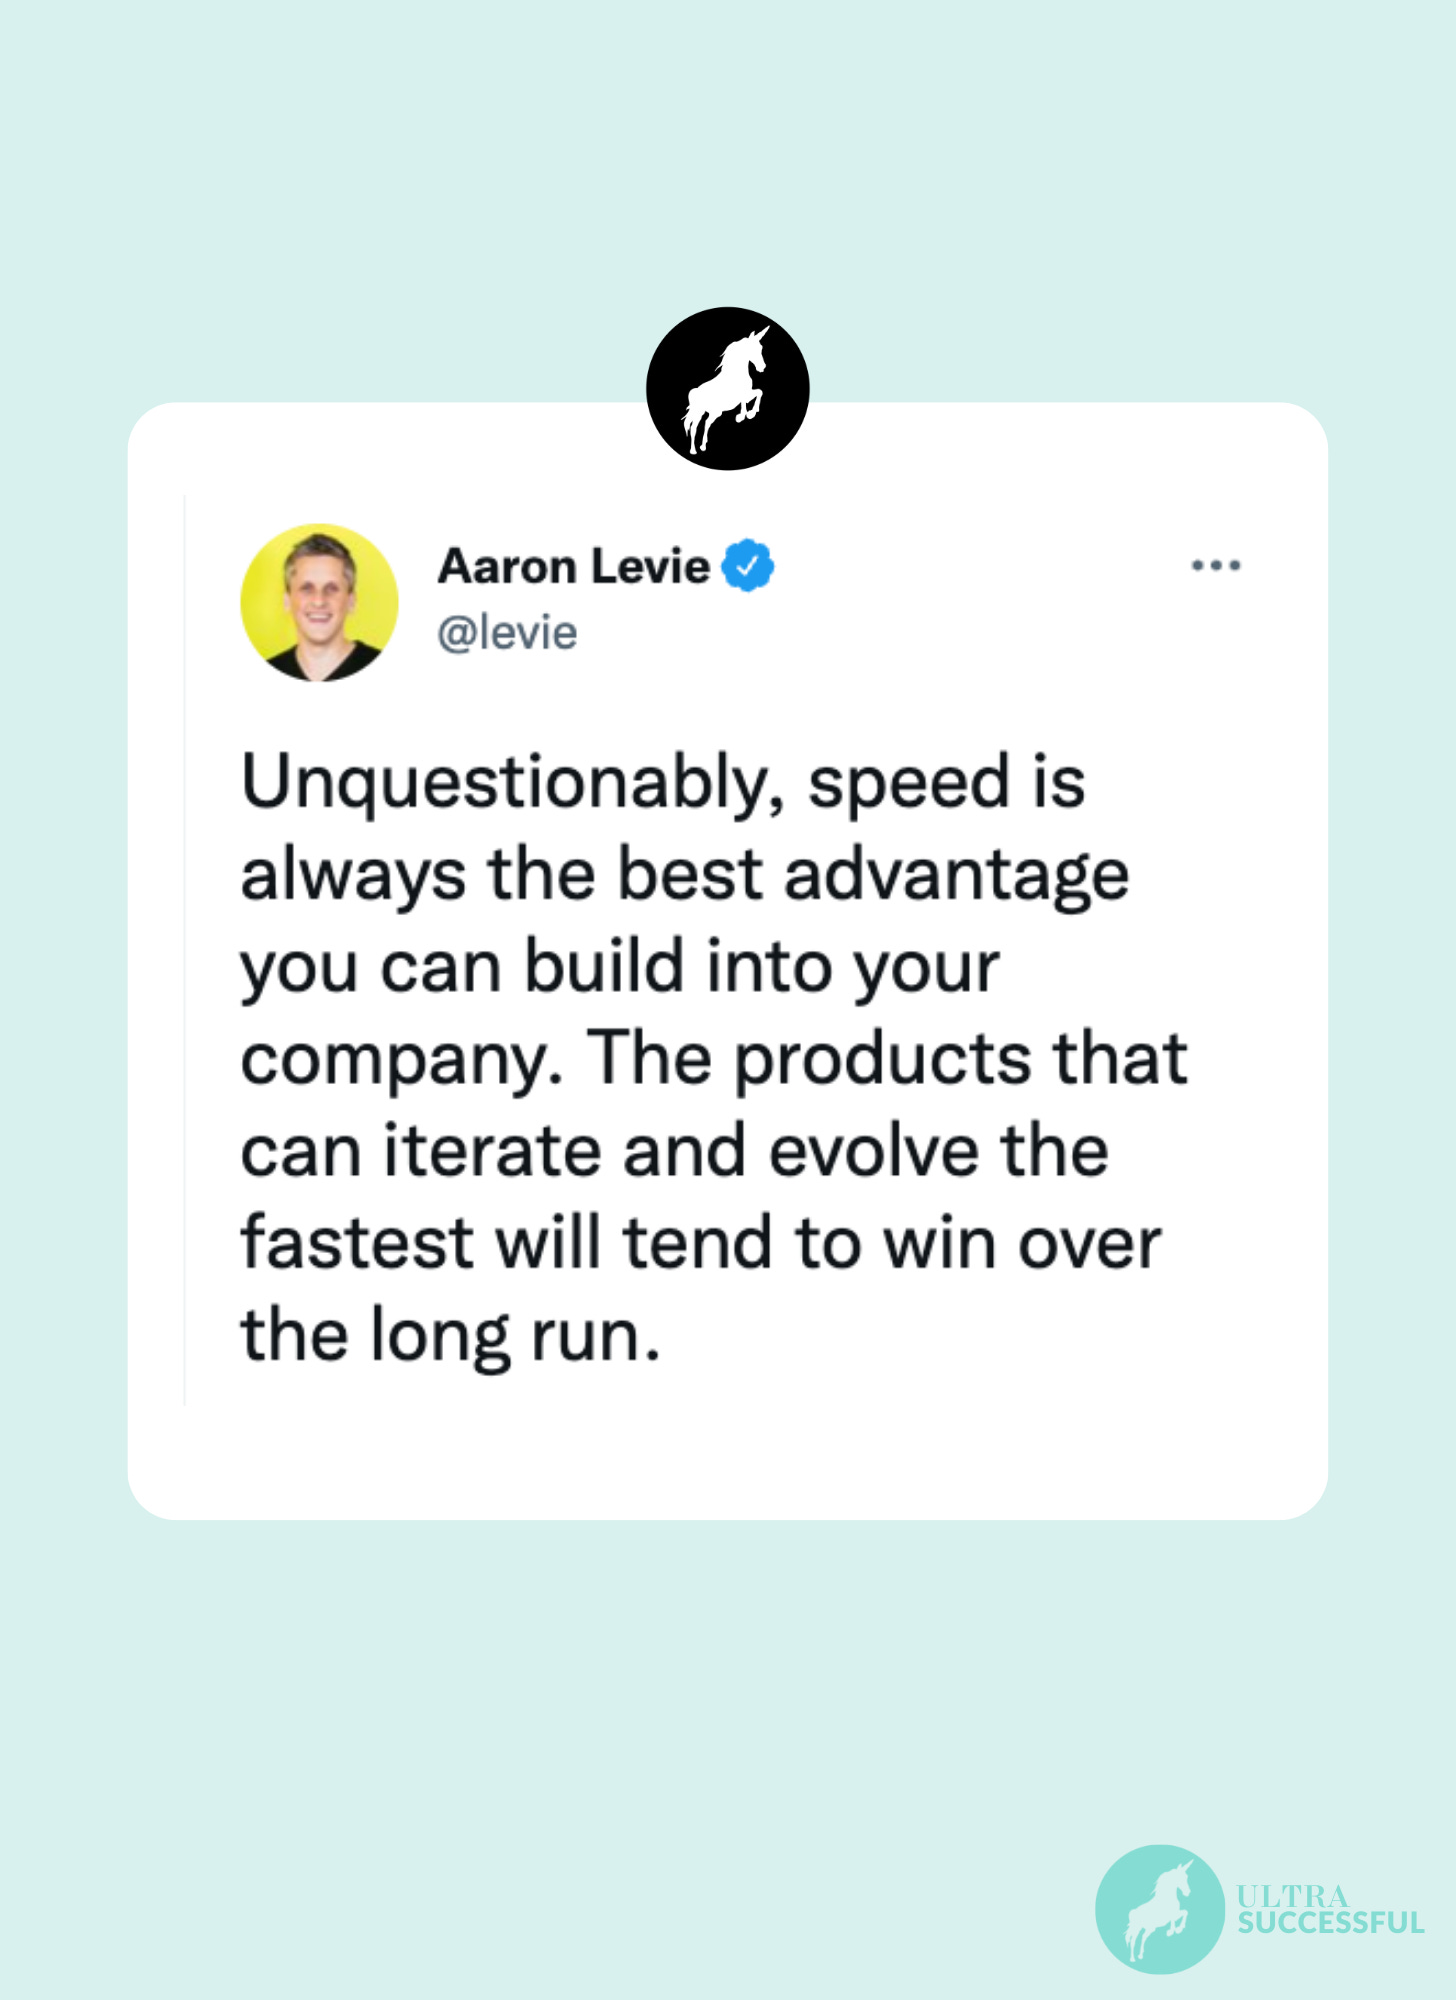 @levie: Unquestionably, speed is always the best advantage you can build into your company. The products that can iterate and evolve the fastest will tend to win over the long run.